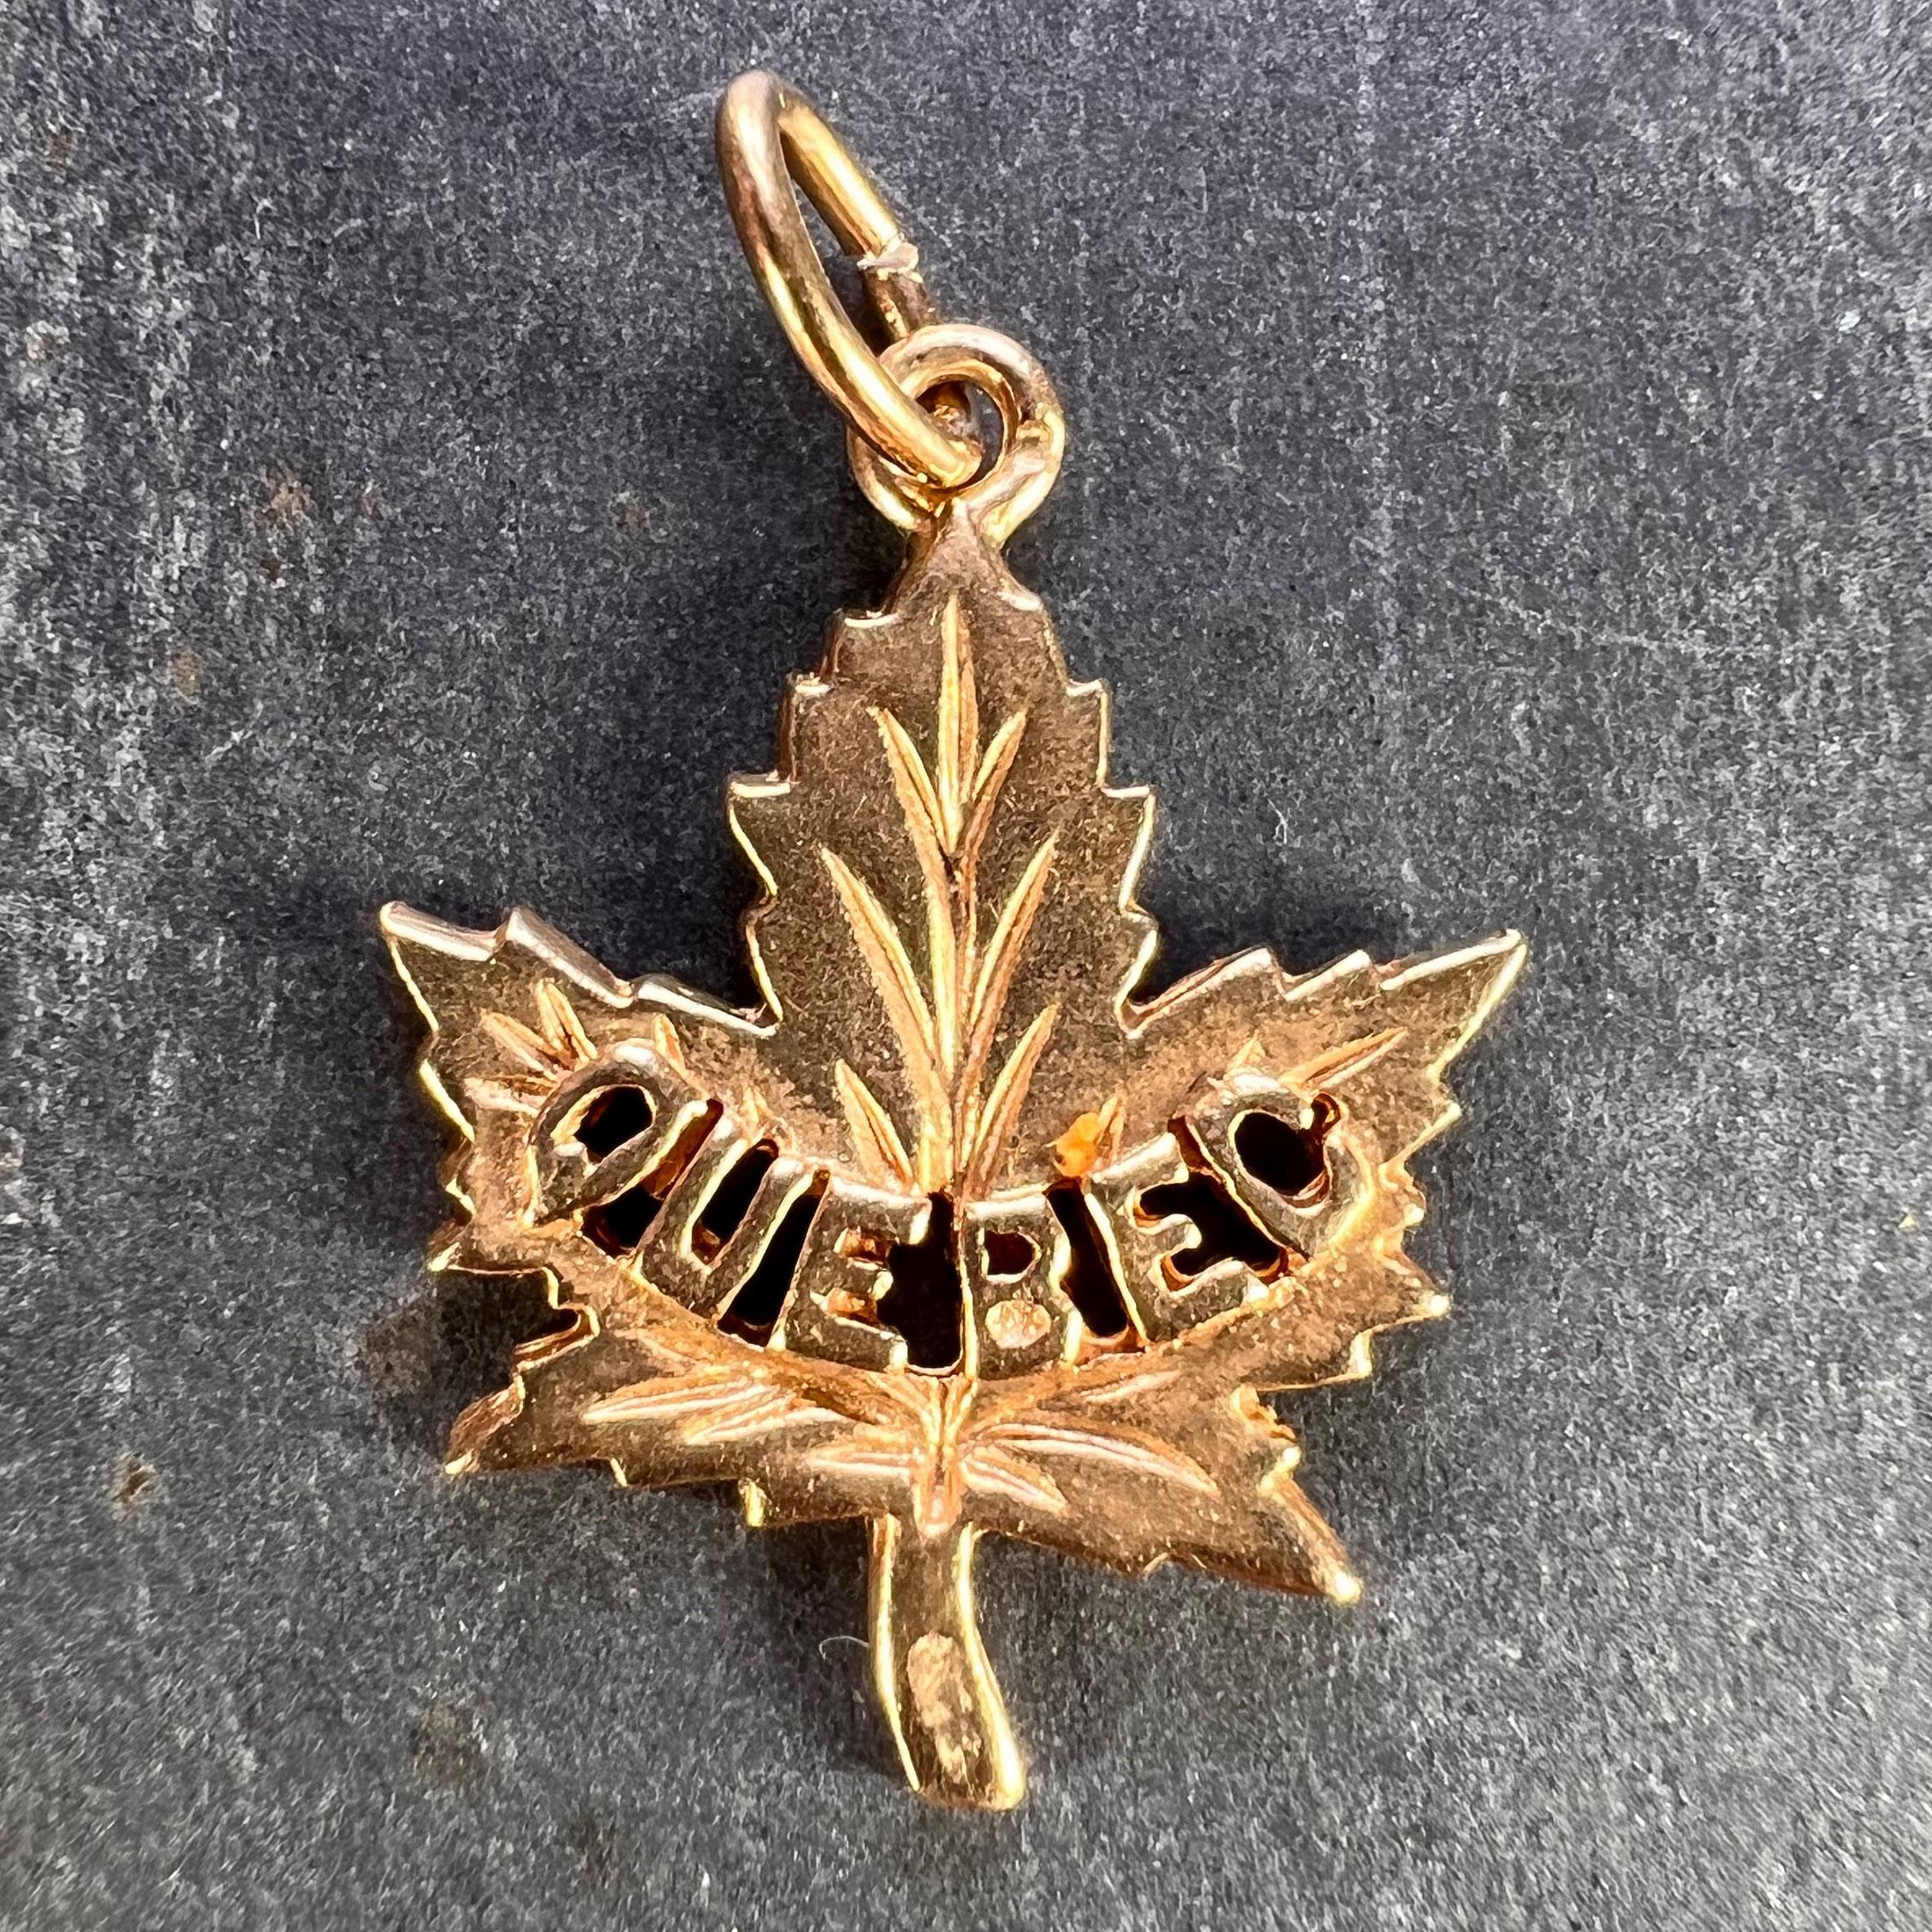 A 14 karat (14K) yellow gold charm pendant designed as a Canadian maple leaf with Quebec written across the front in block capitals. Marked 14K for 14 karat gold with an unknown maker's mark and a French import mark for 14 karat gold.

Dimensions: